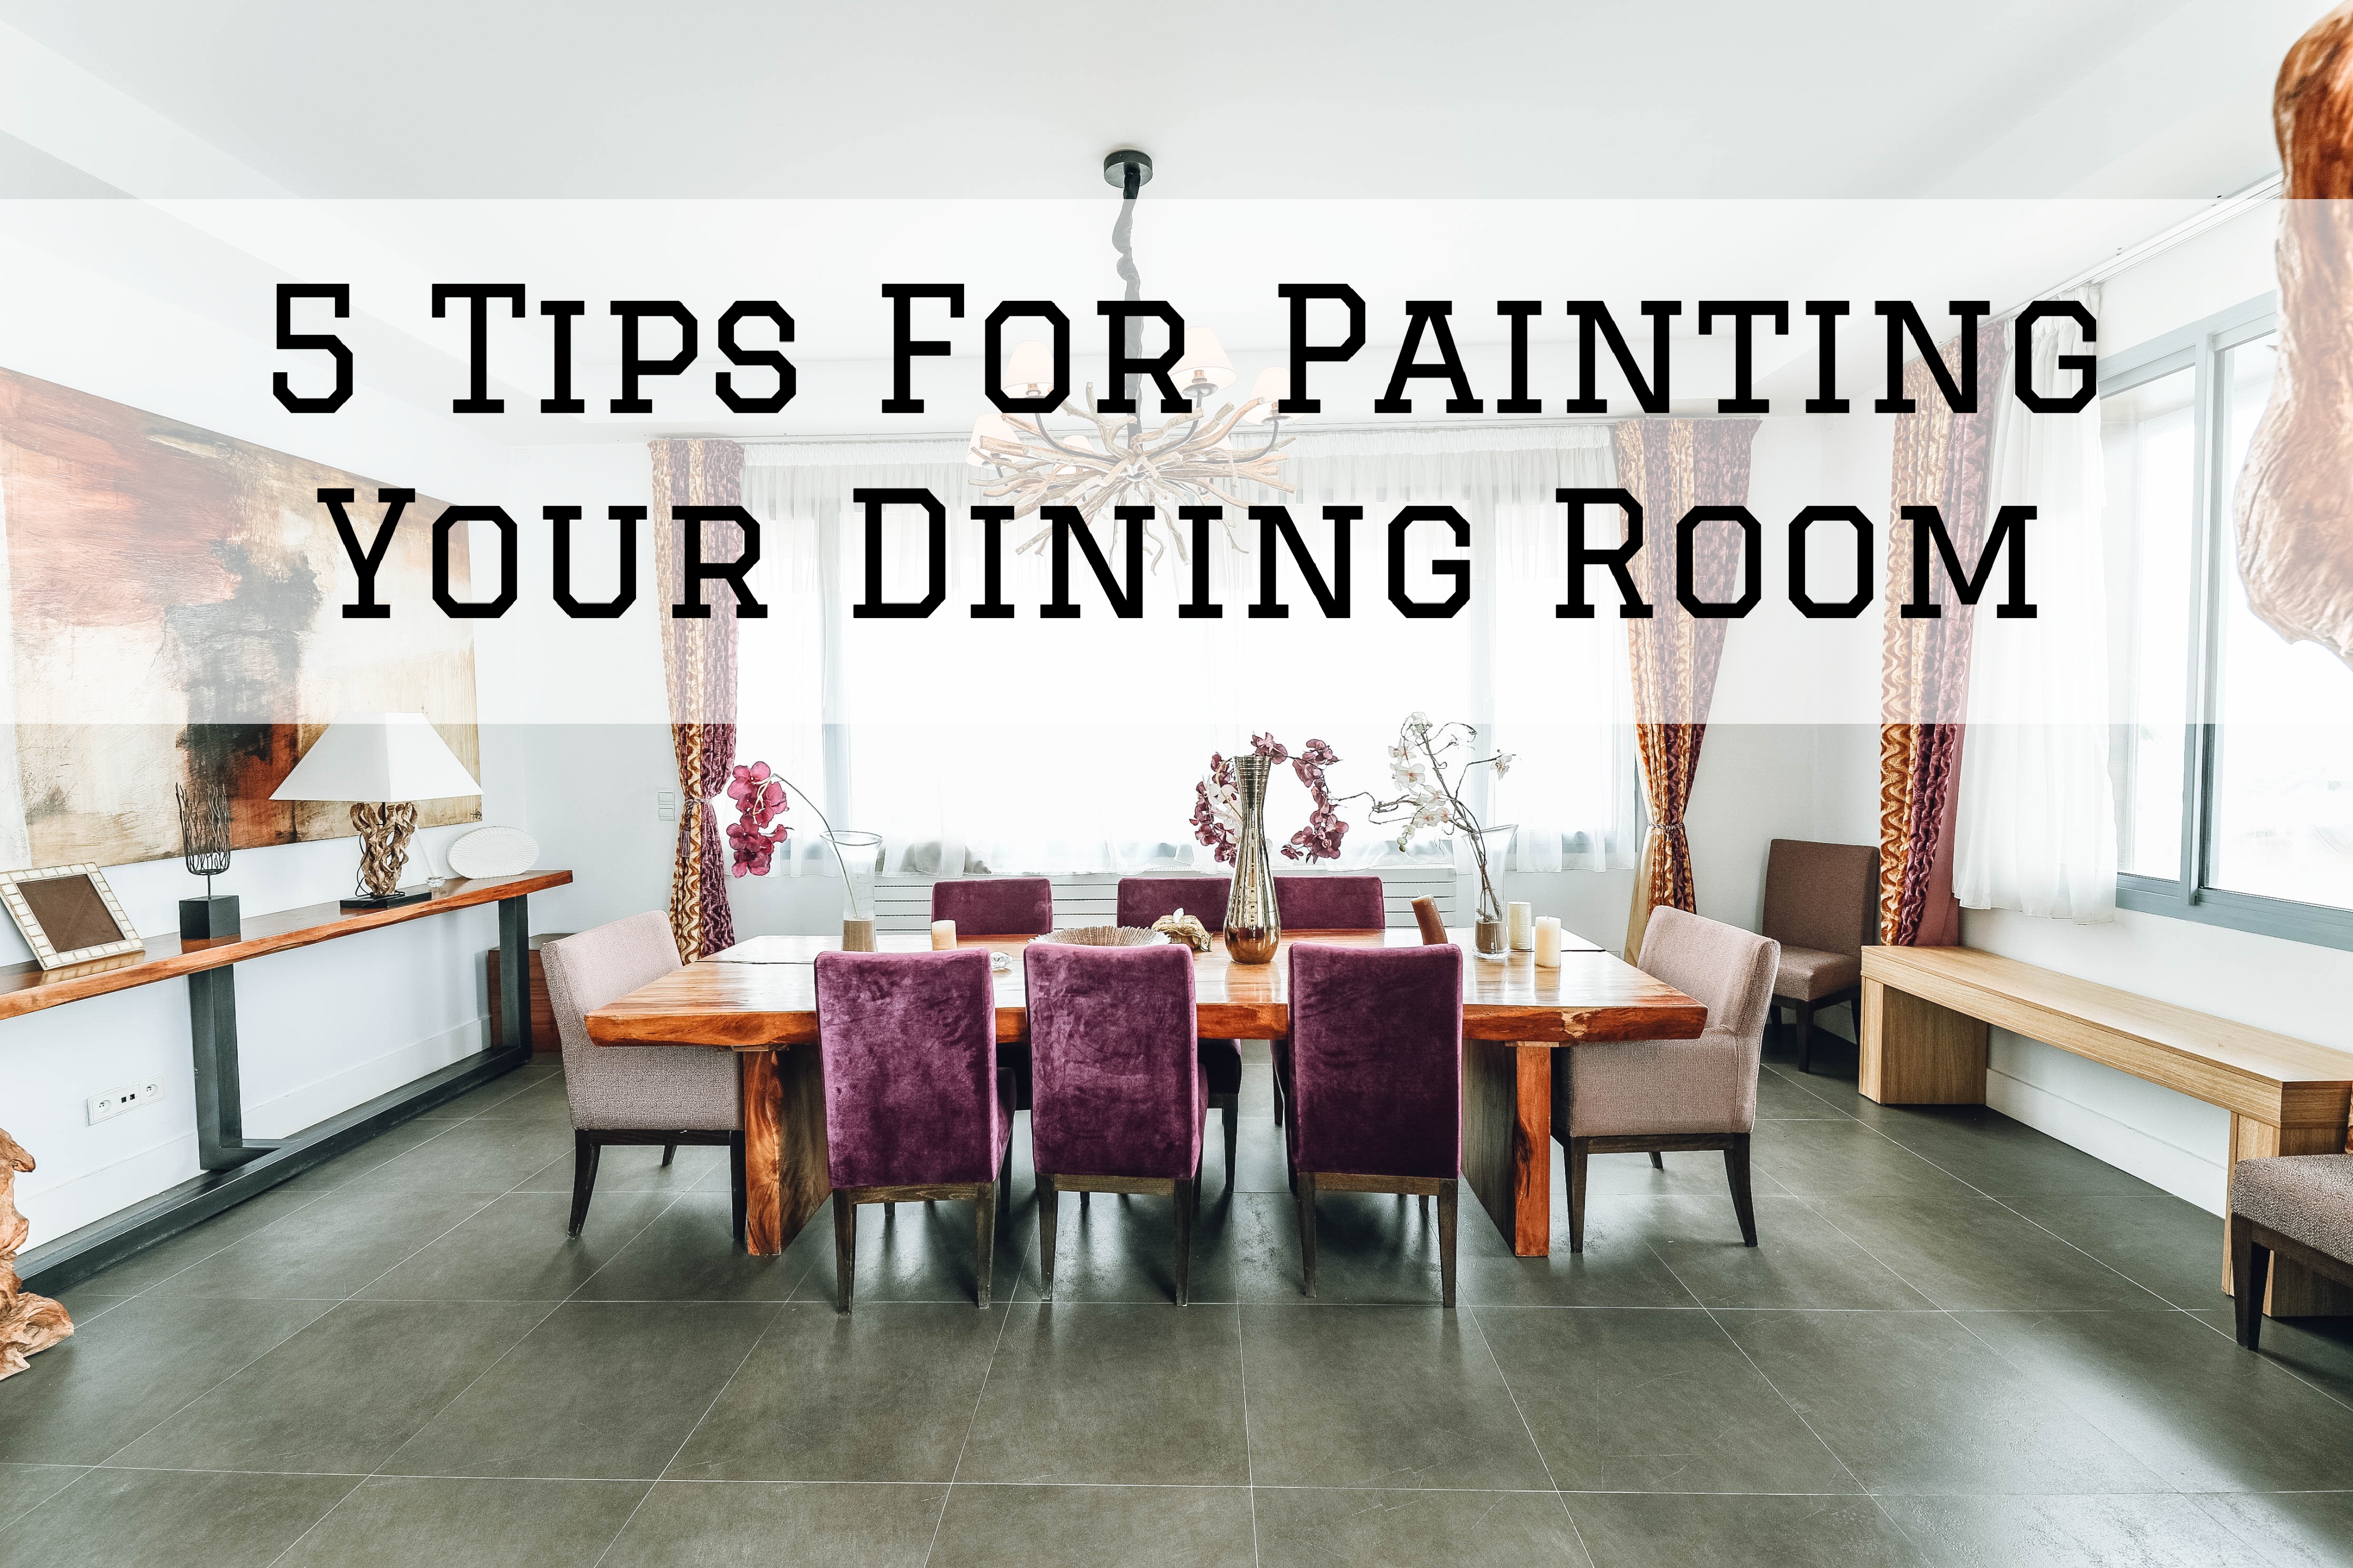 2021-05-14 Millers Painting Ontario Ottawa Painting Dining Room Tips